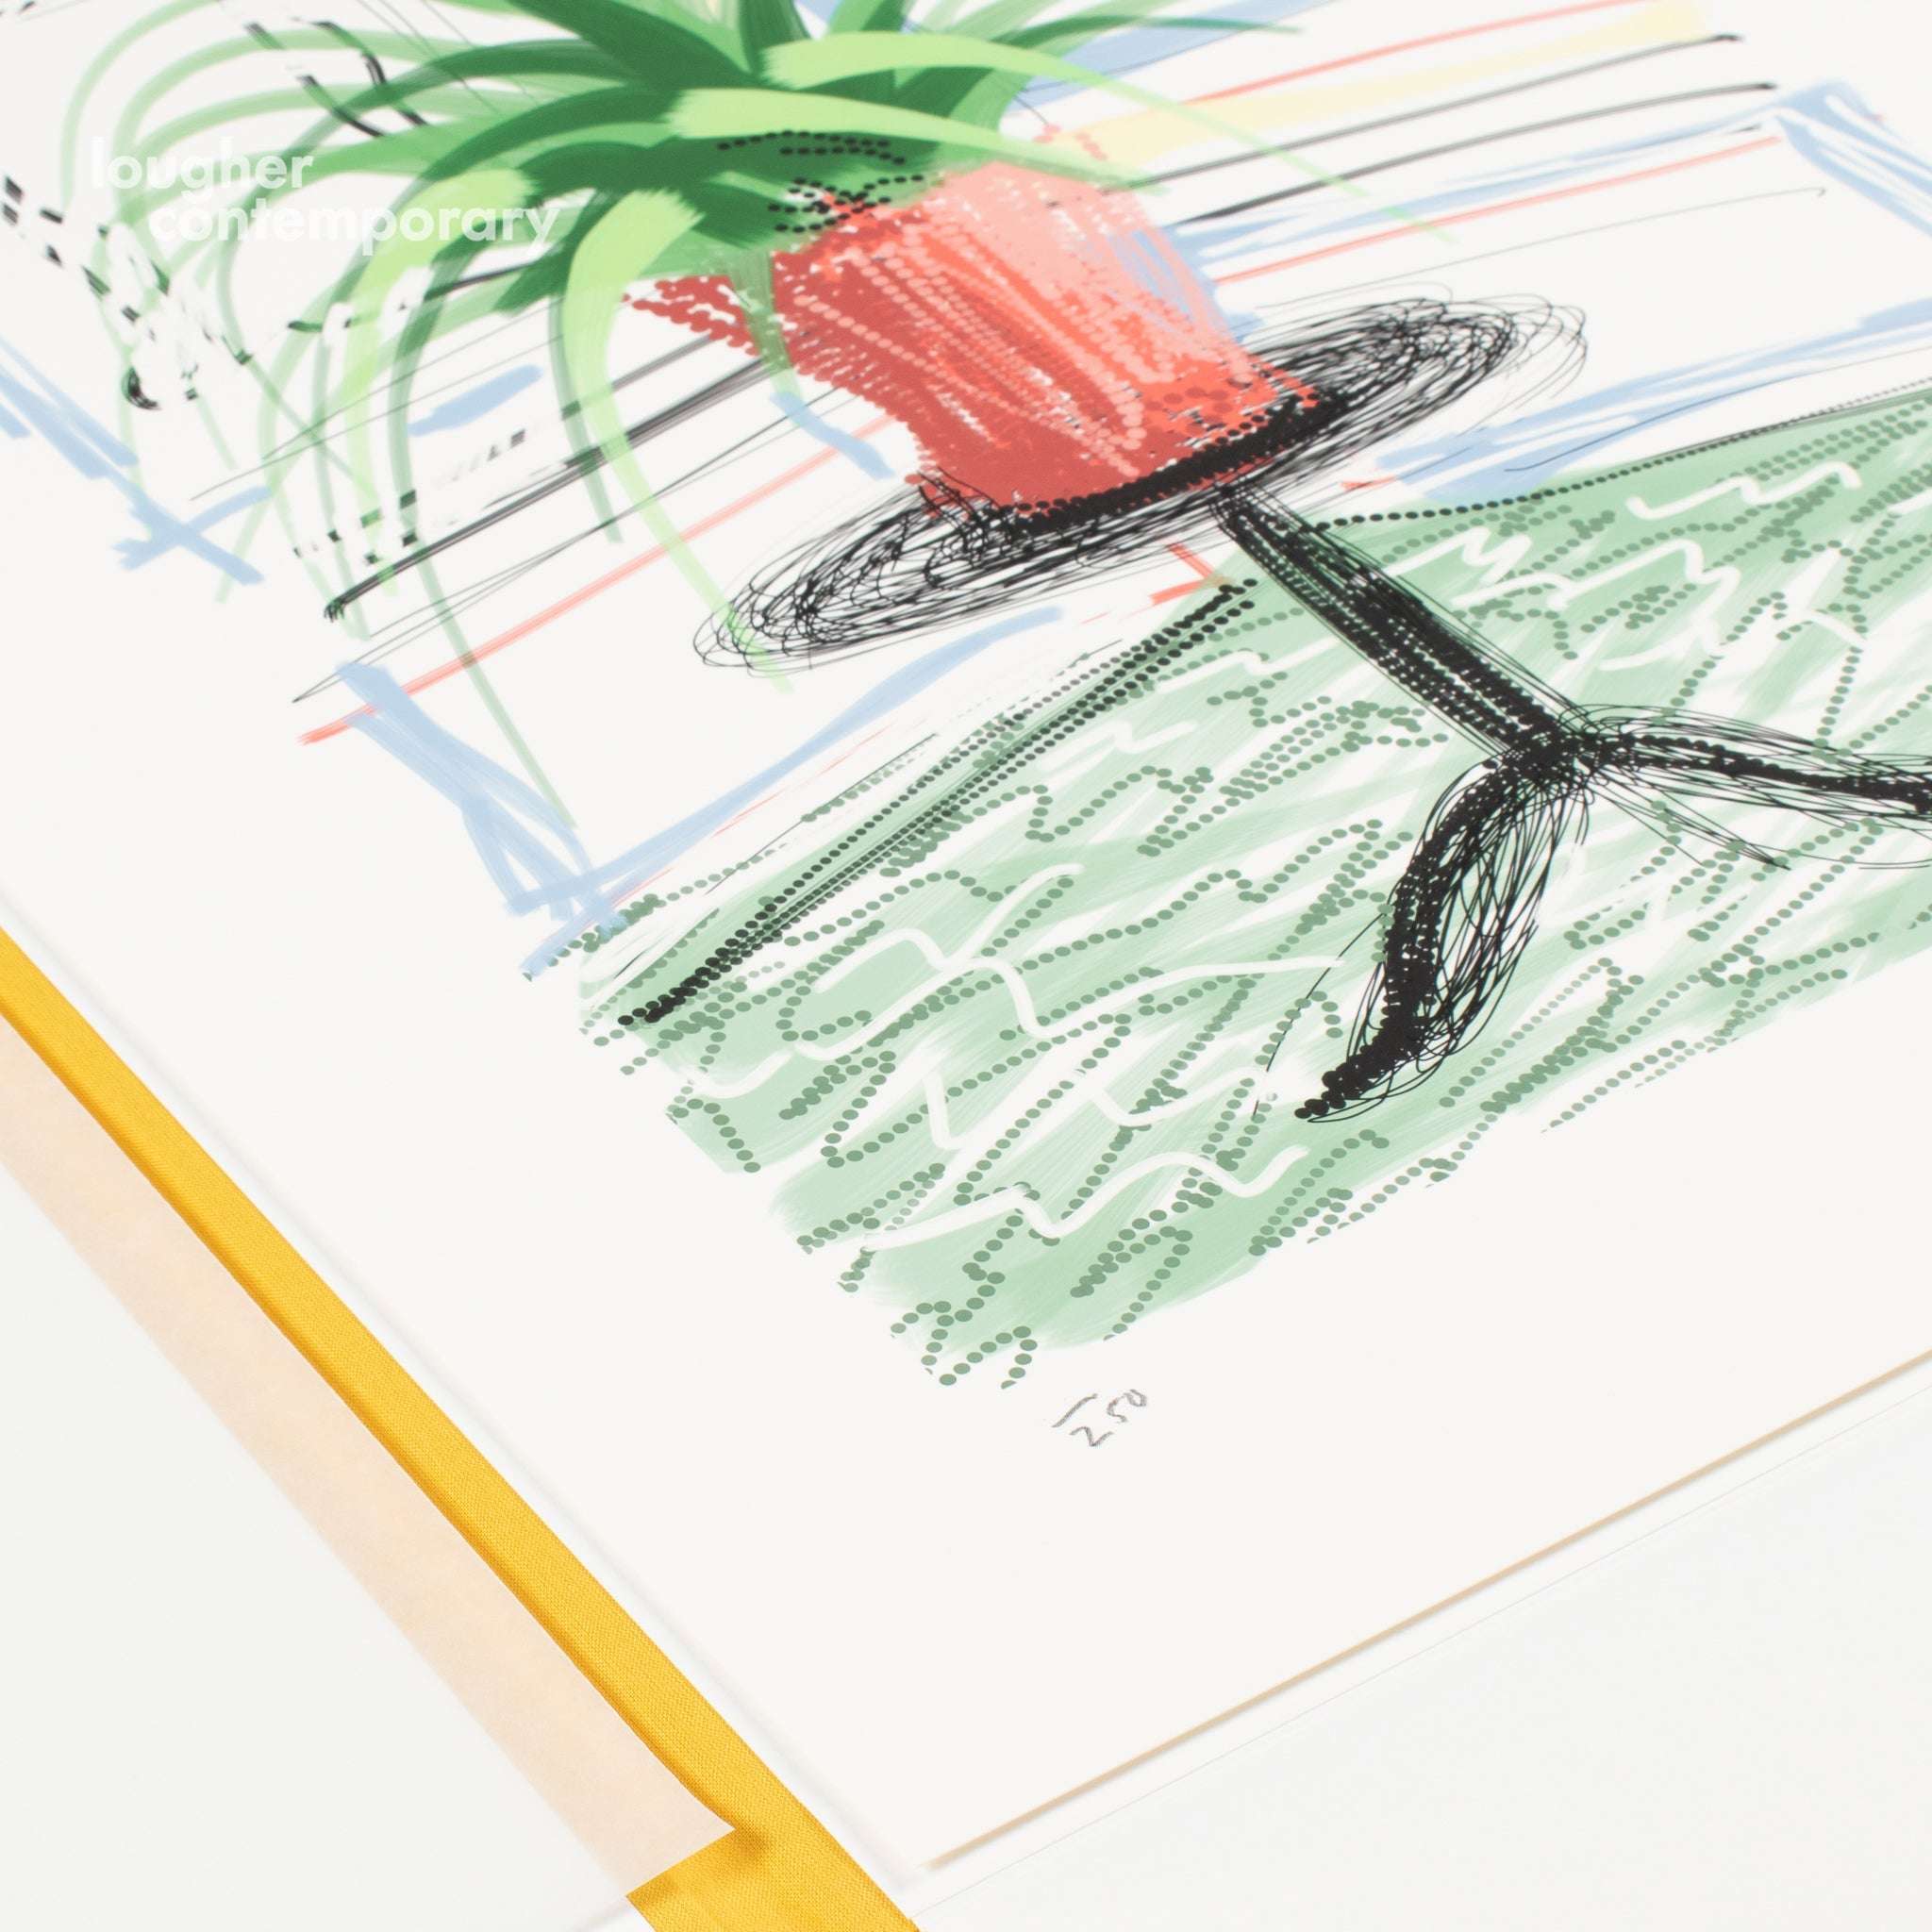 David Hockney, A Bigger Book. Art Edition (No. 501–750), 'Untitled, 468', 2010 For Sale - Lougher Contemporary